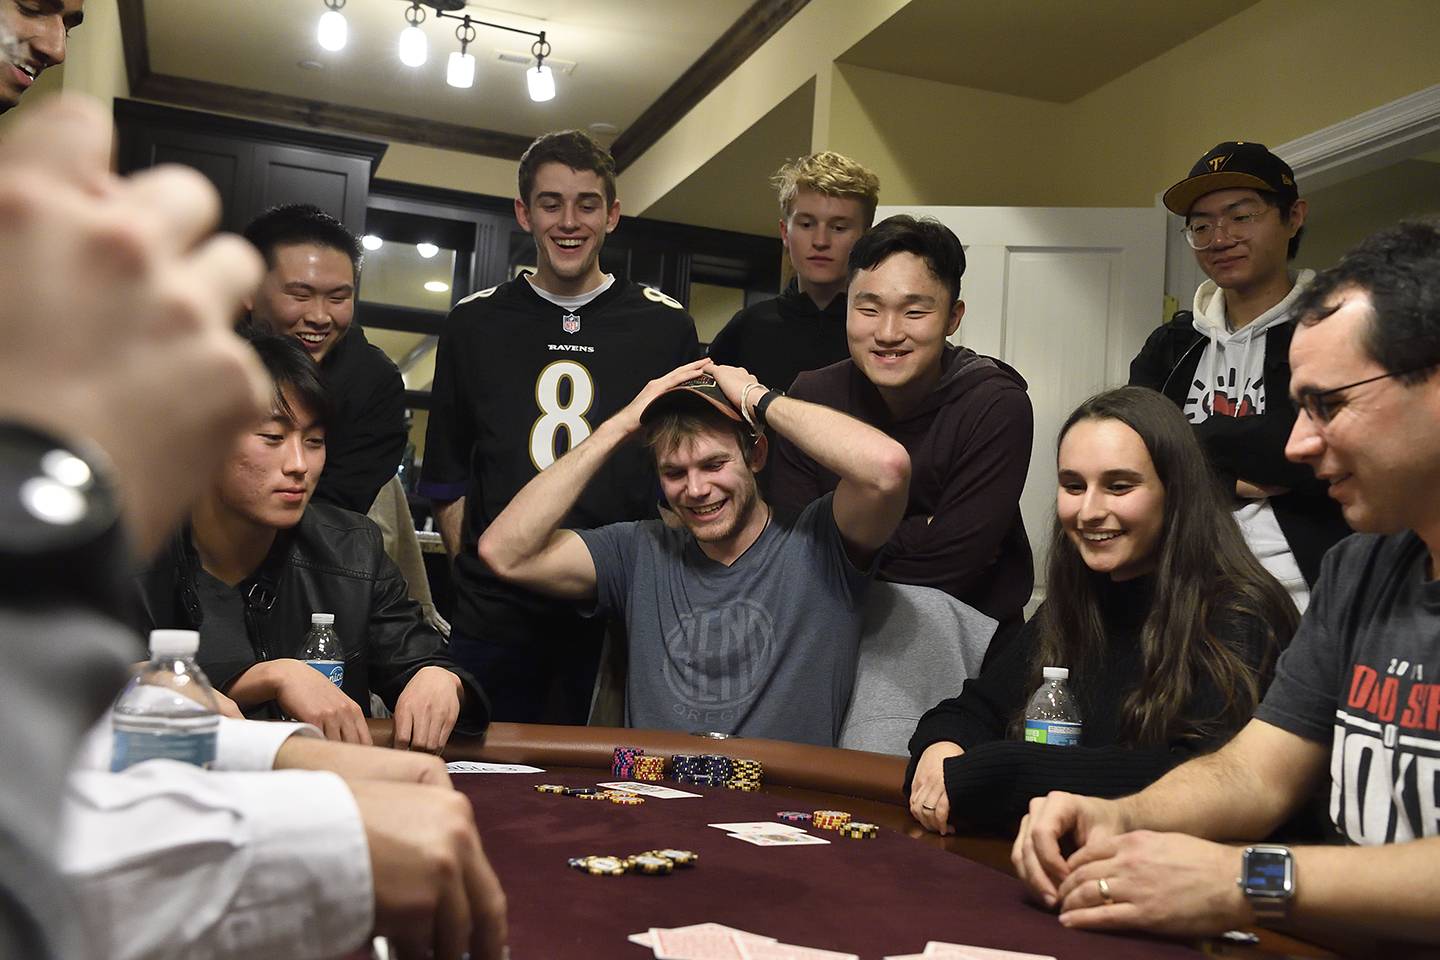 A student gets a bad hand in poker